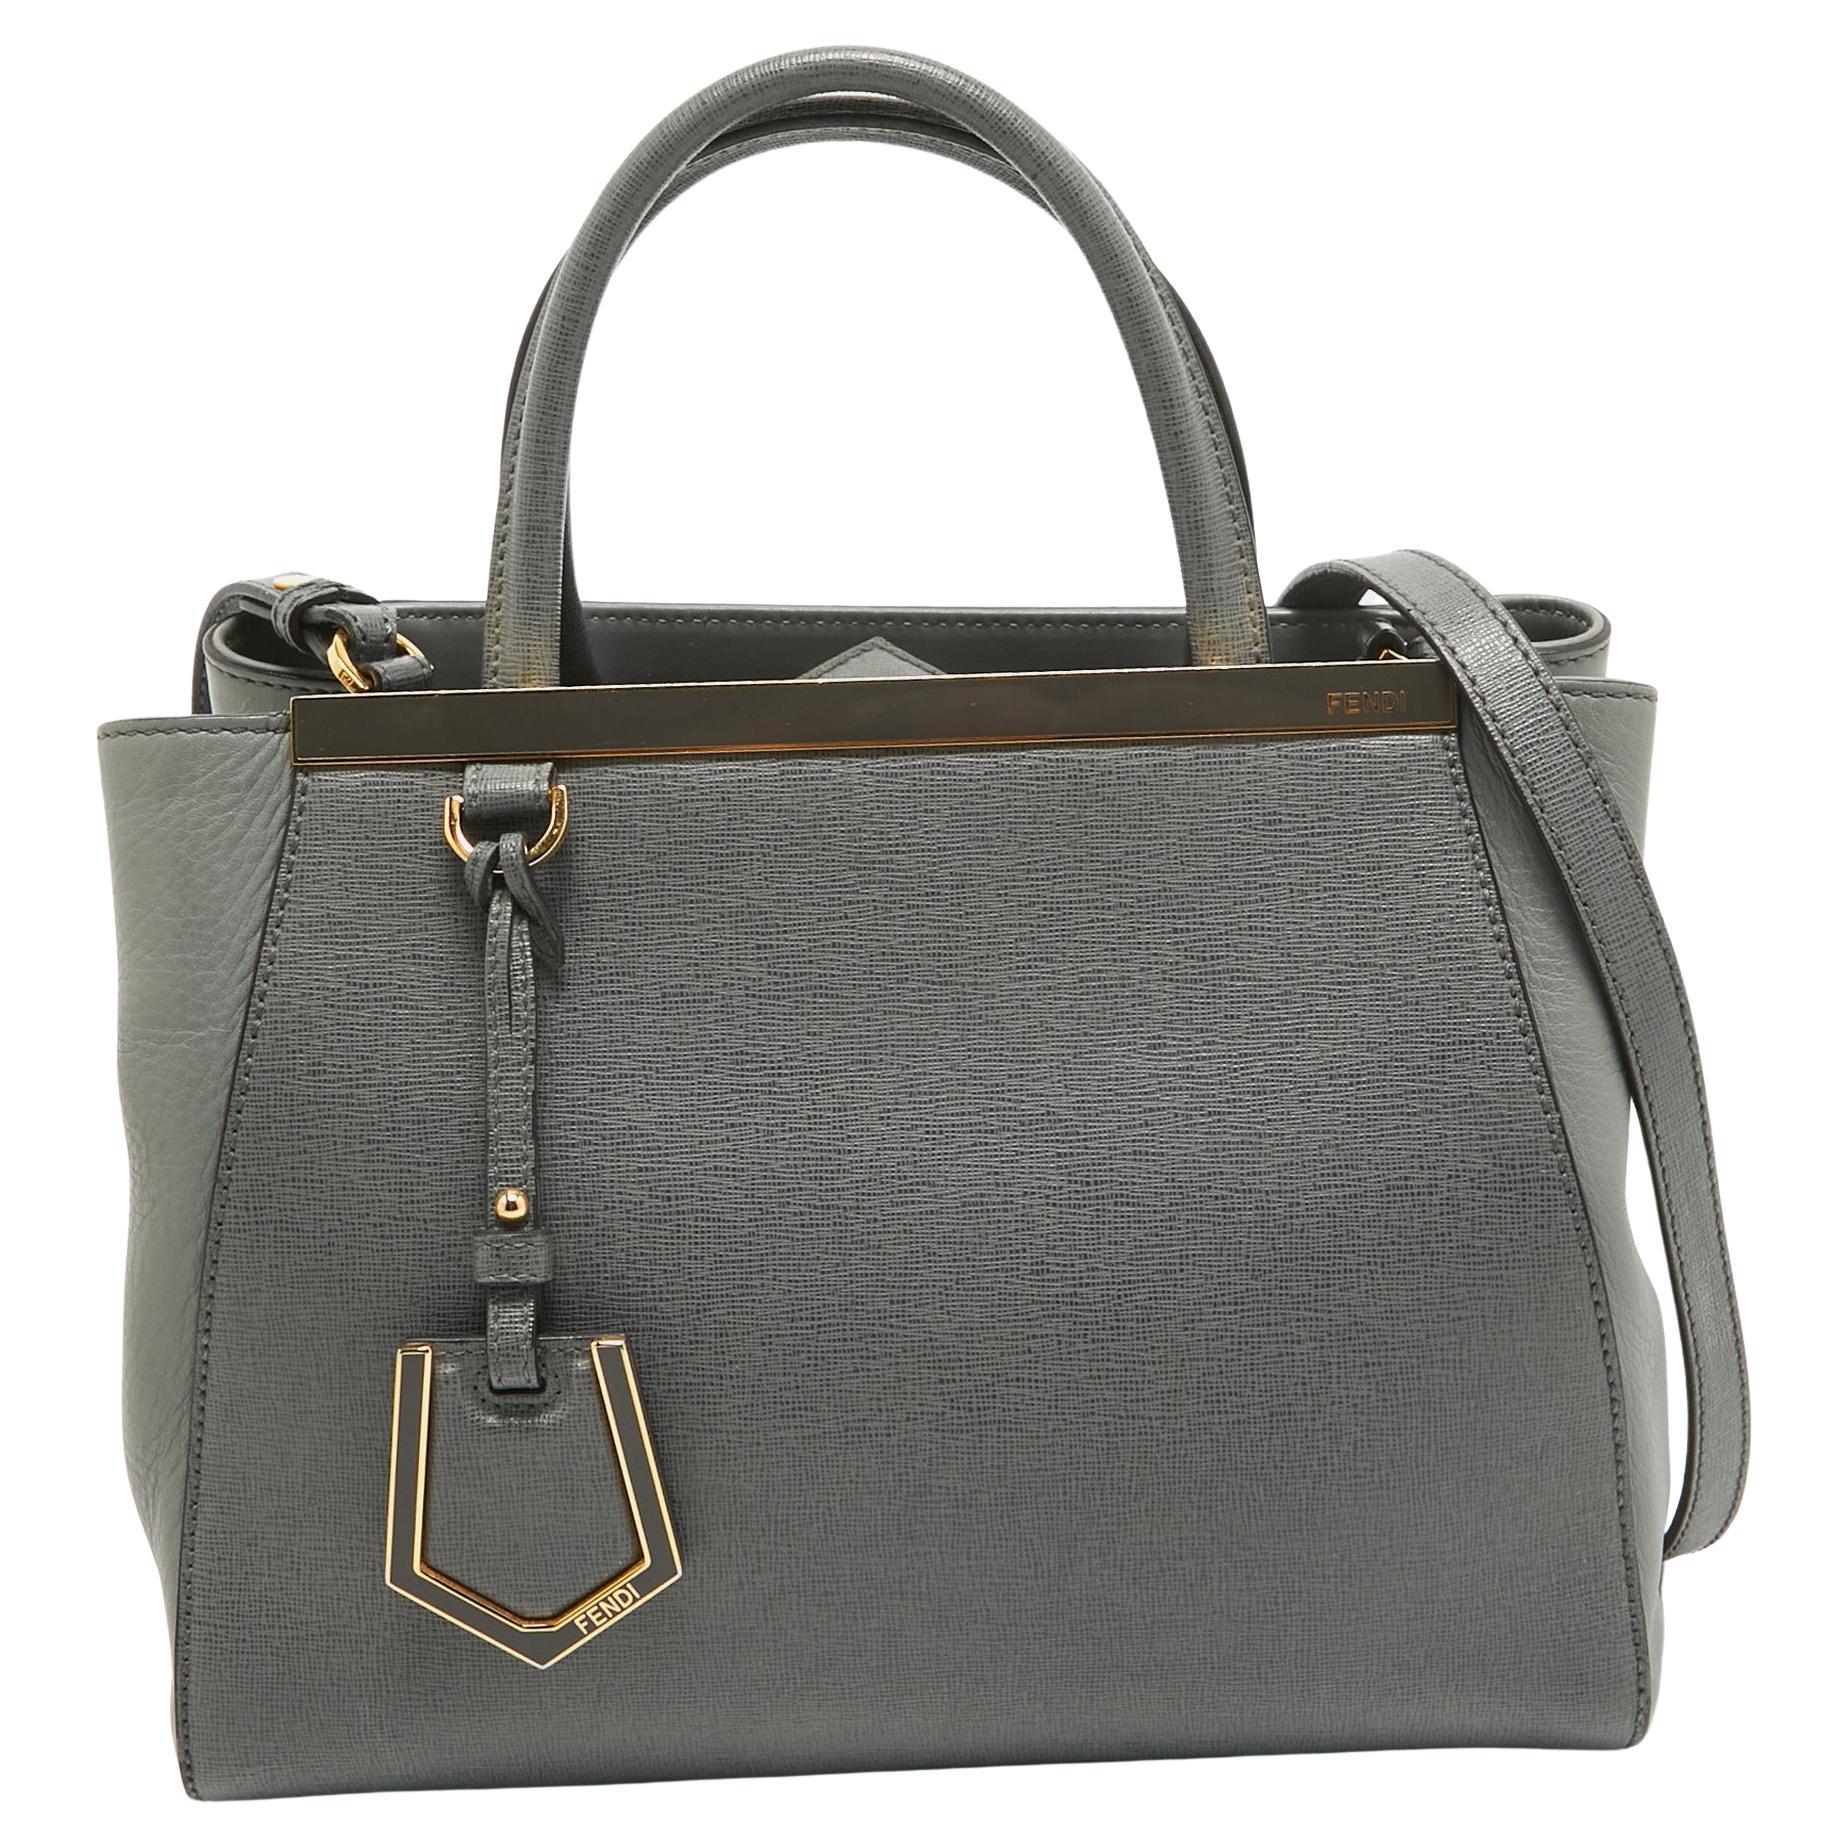 Fendi Grey Leather Small 2Jours Tote For Sale